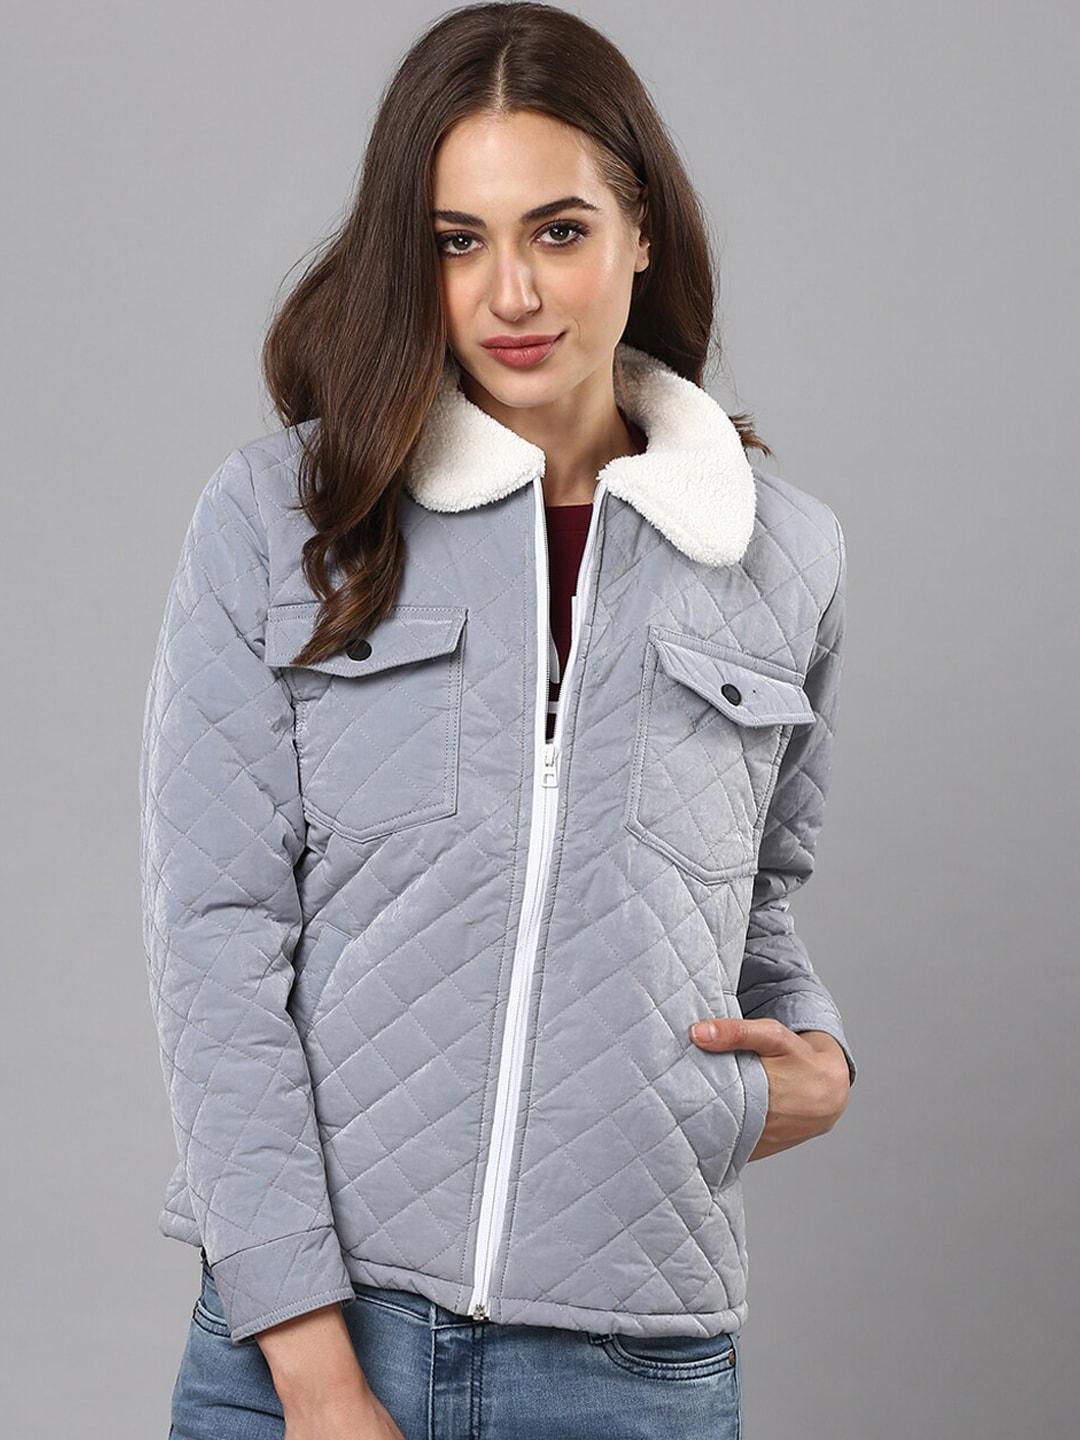 Campus Sutra Women Grey White Windcheater Quilted Jacket